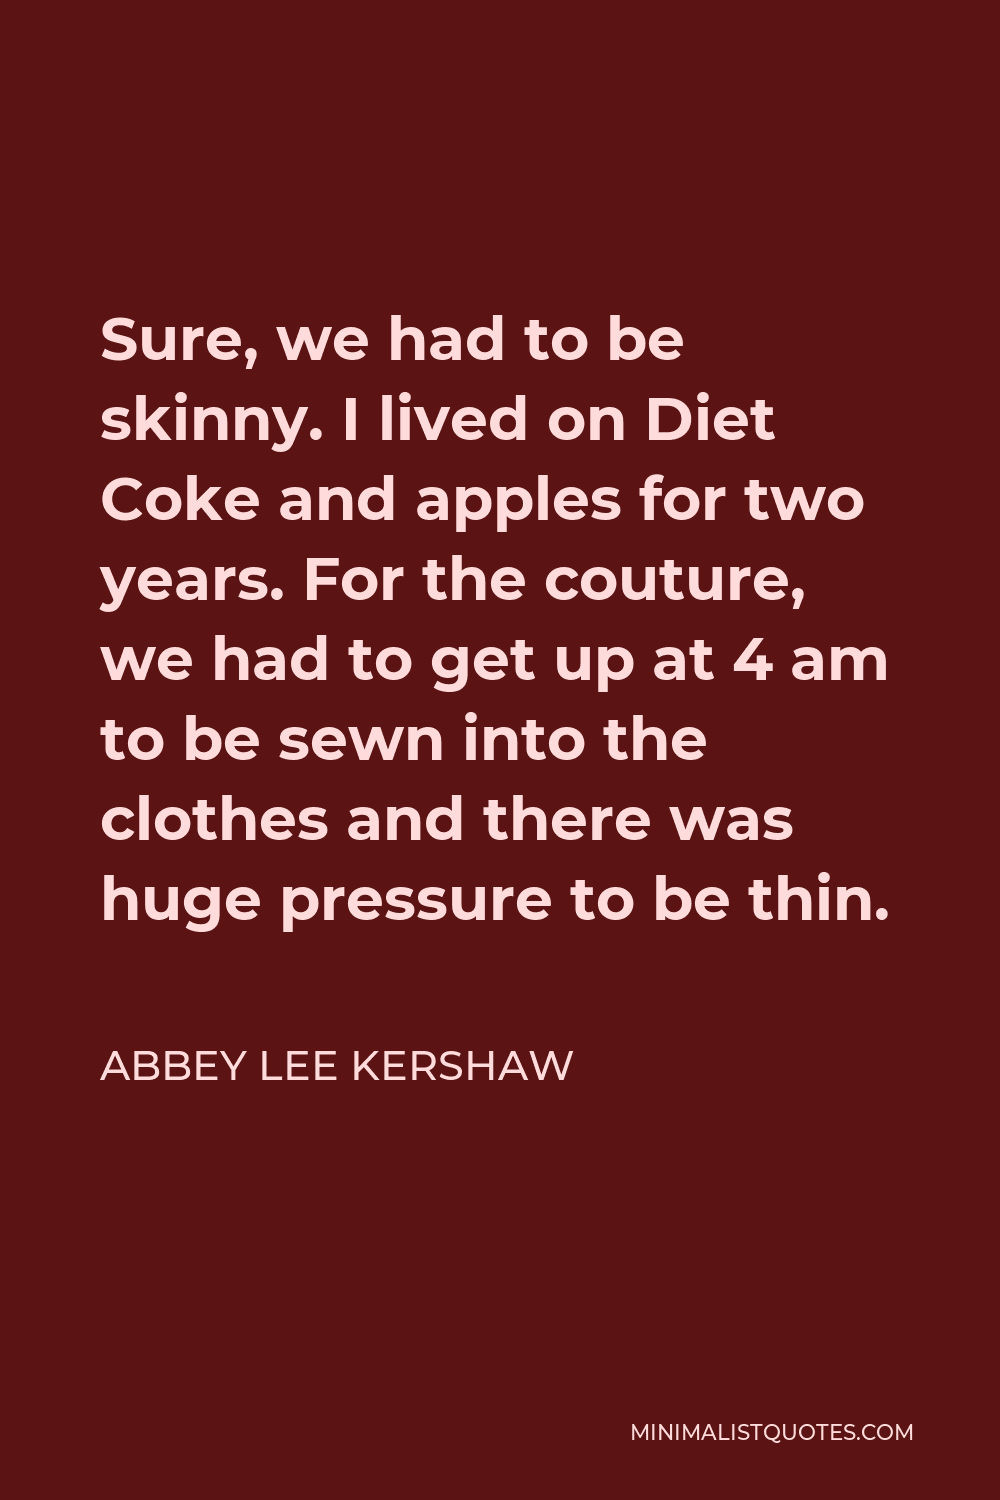 Abbey Lee Kershaw Quote - Sure, we had to be skinny. I lived on Diet Coke and apples for two years. For the couture, we had to get up at 4 am to be sewn into the clothes and there was huge pressure to be thin.